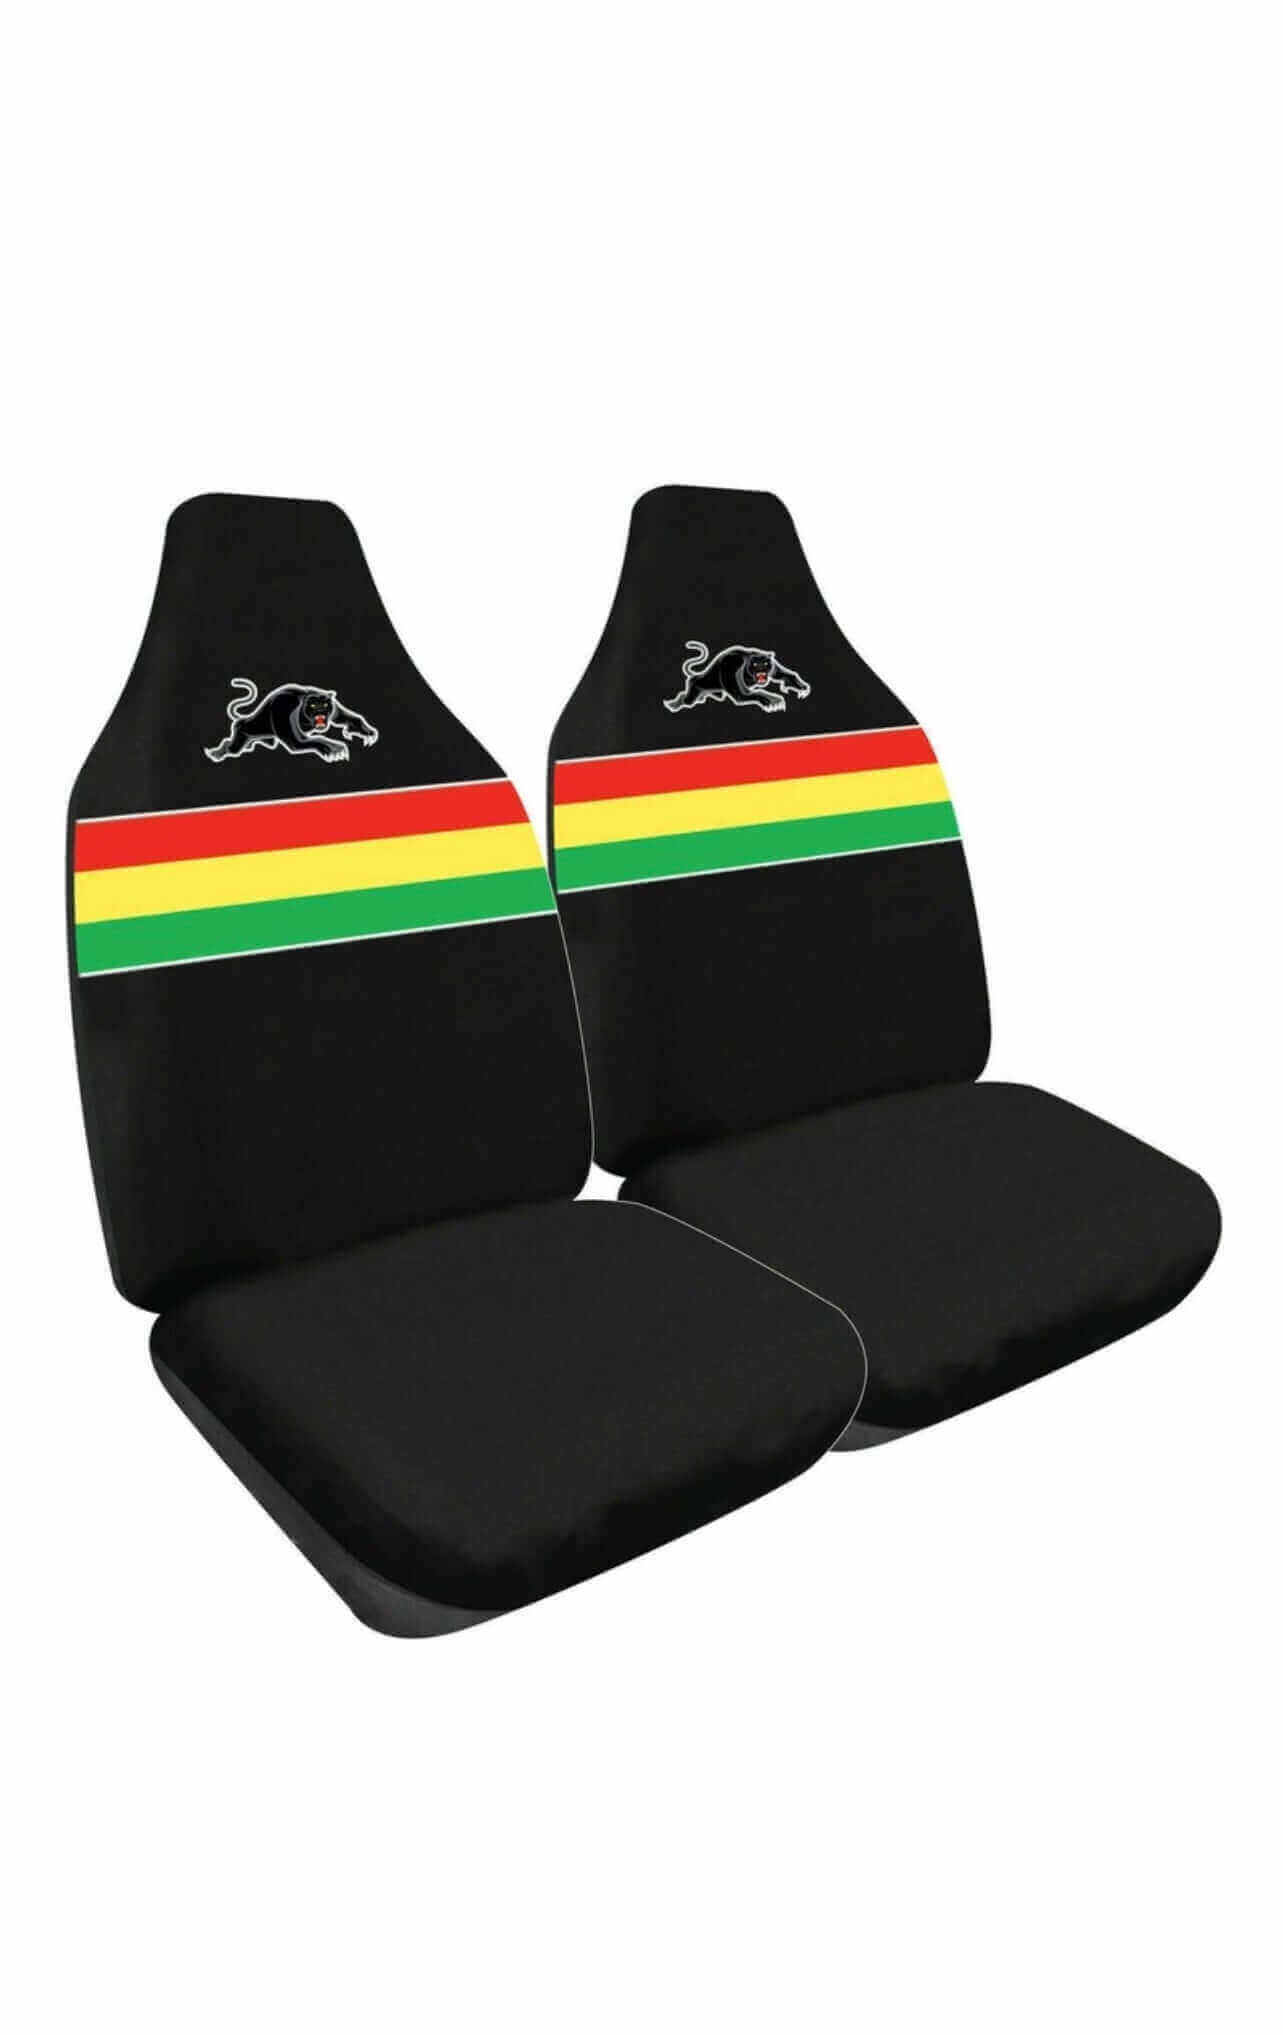 PENRITH PANTHERS CAR SEAT COVERS_PENRITH PANTHERS_STUBBY CLUB